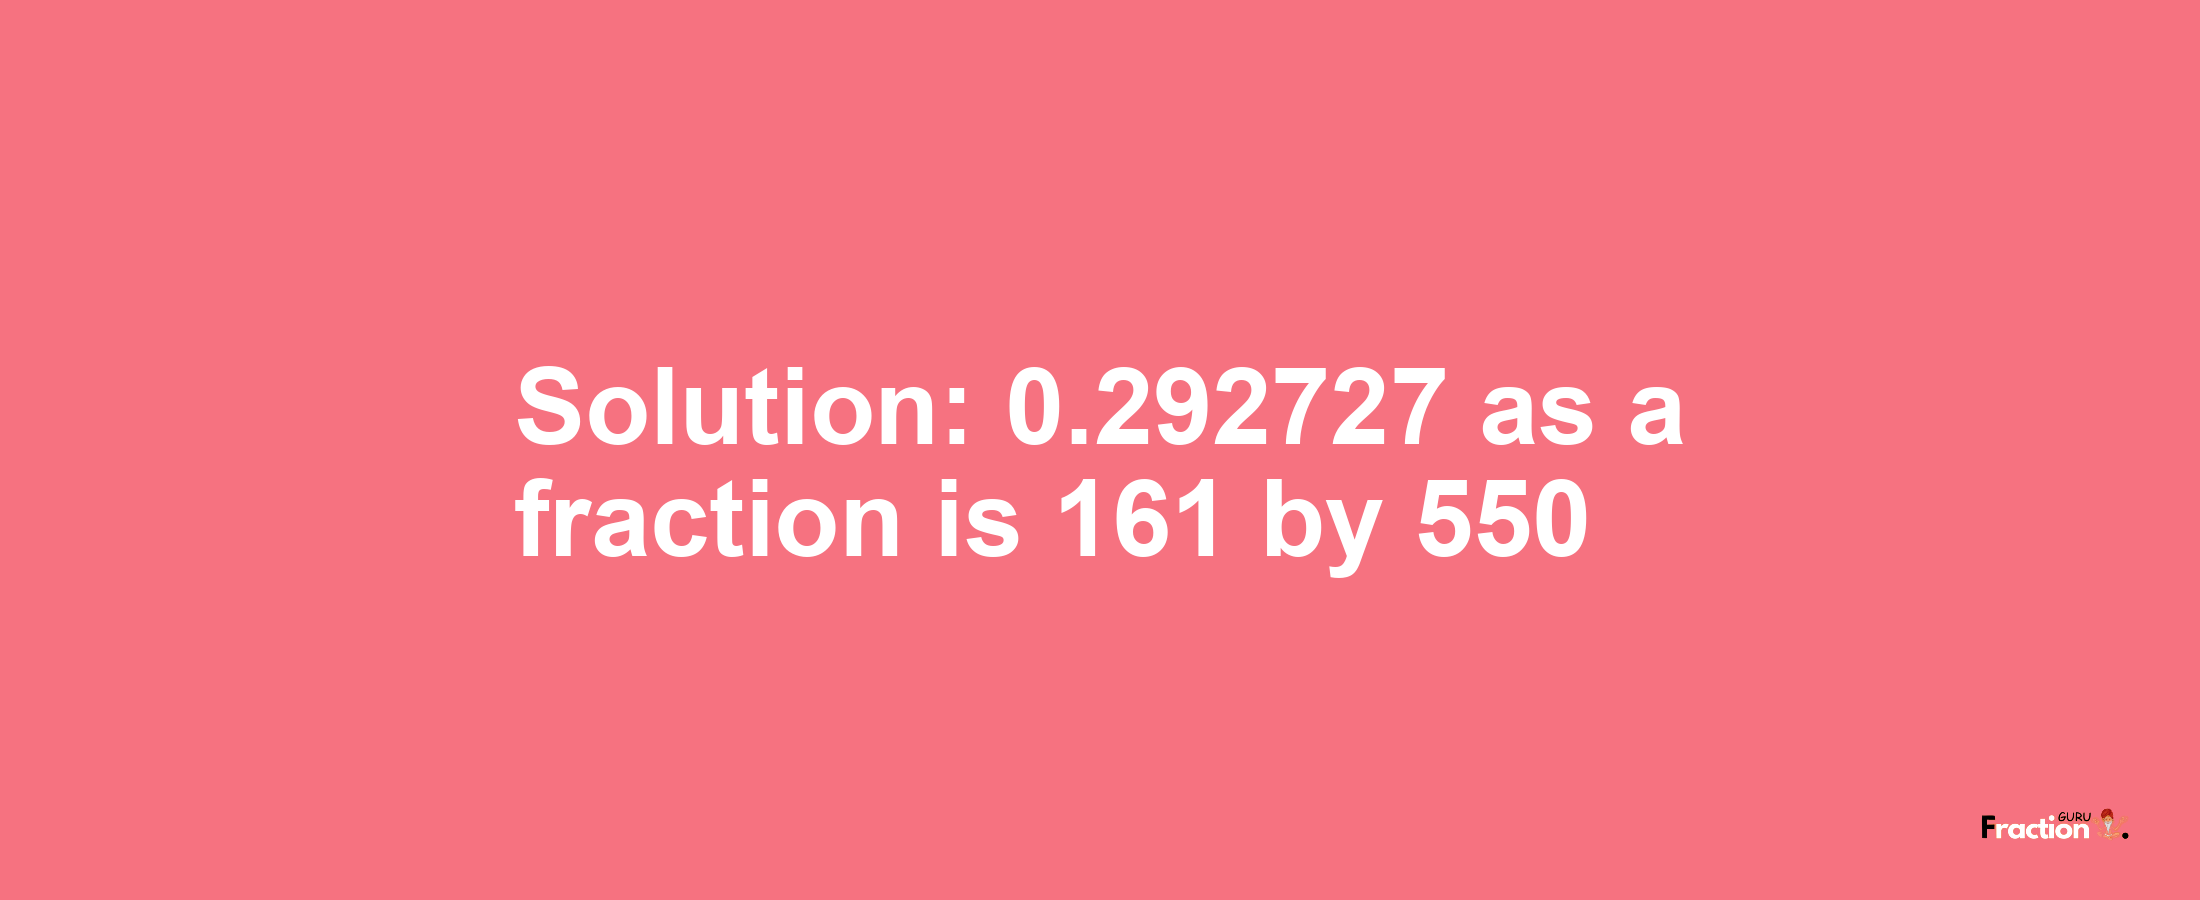 Solution:0.292727 as a fraction is 161/550